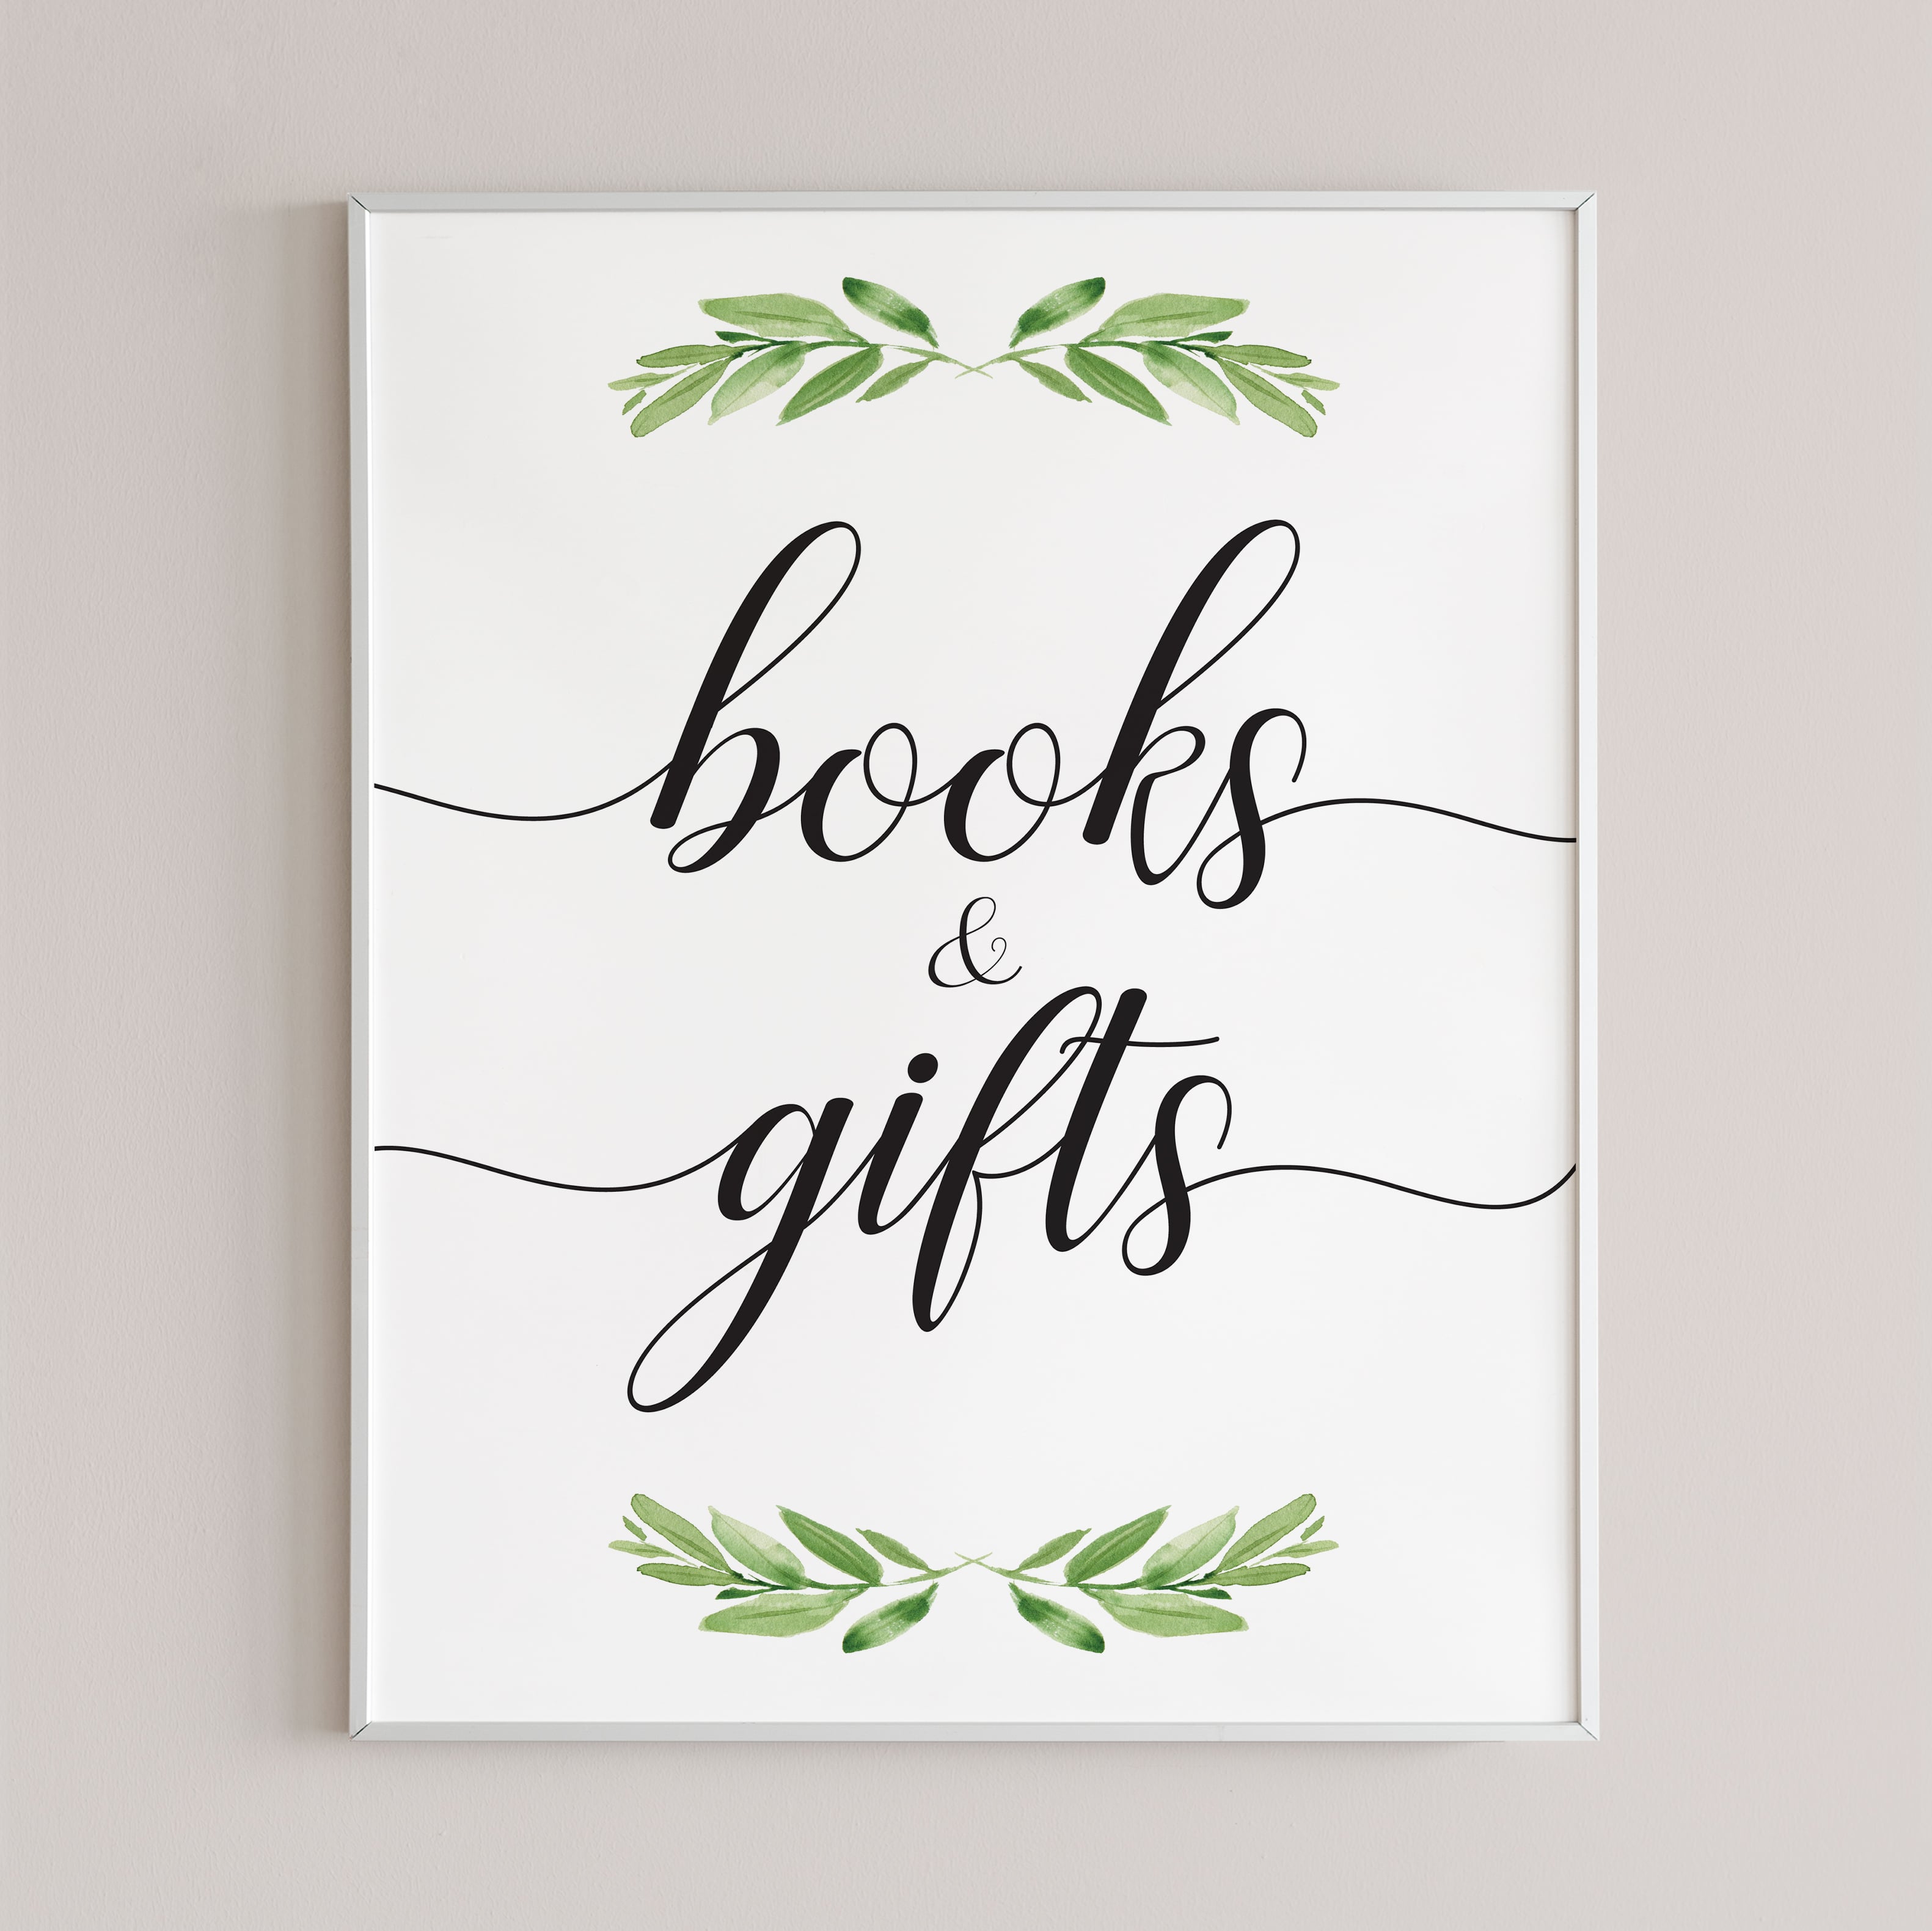 Instant download gift table sign by LittleSizzle